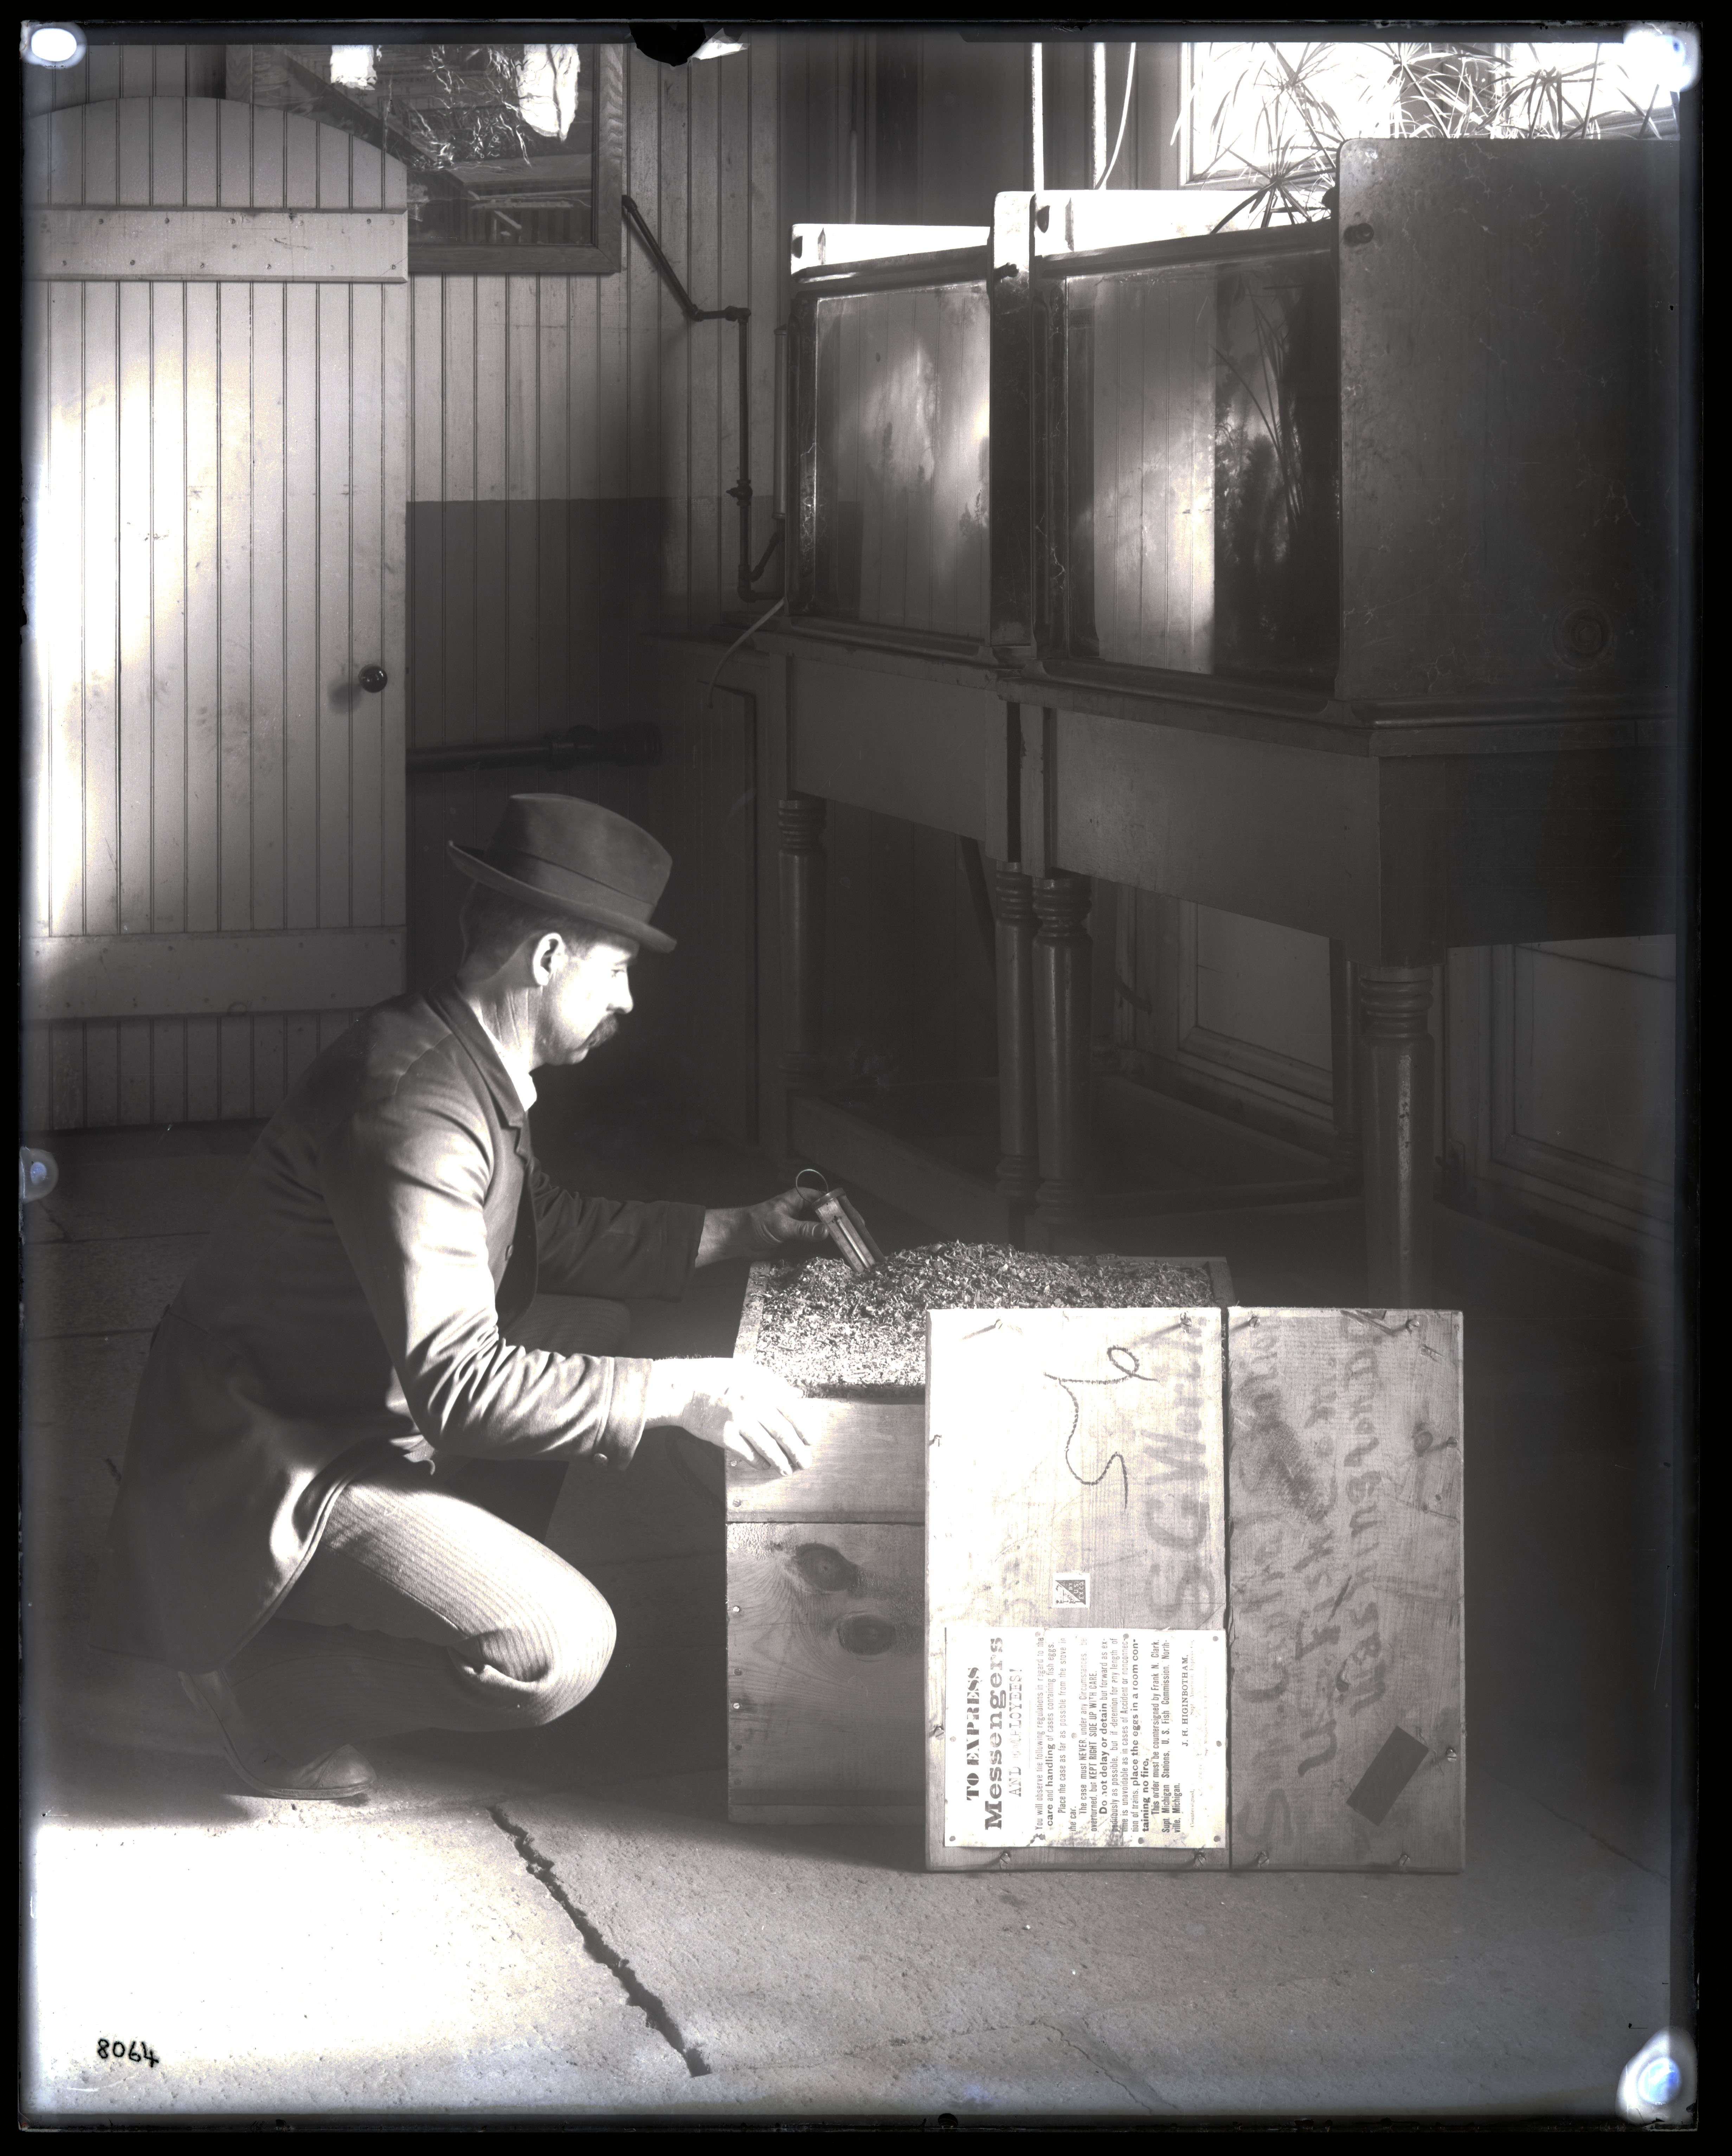 Black and white image of man kneeling beside wooden crate.